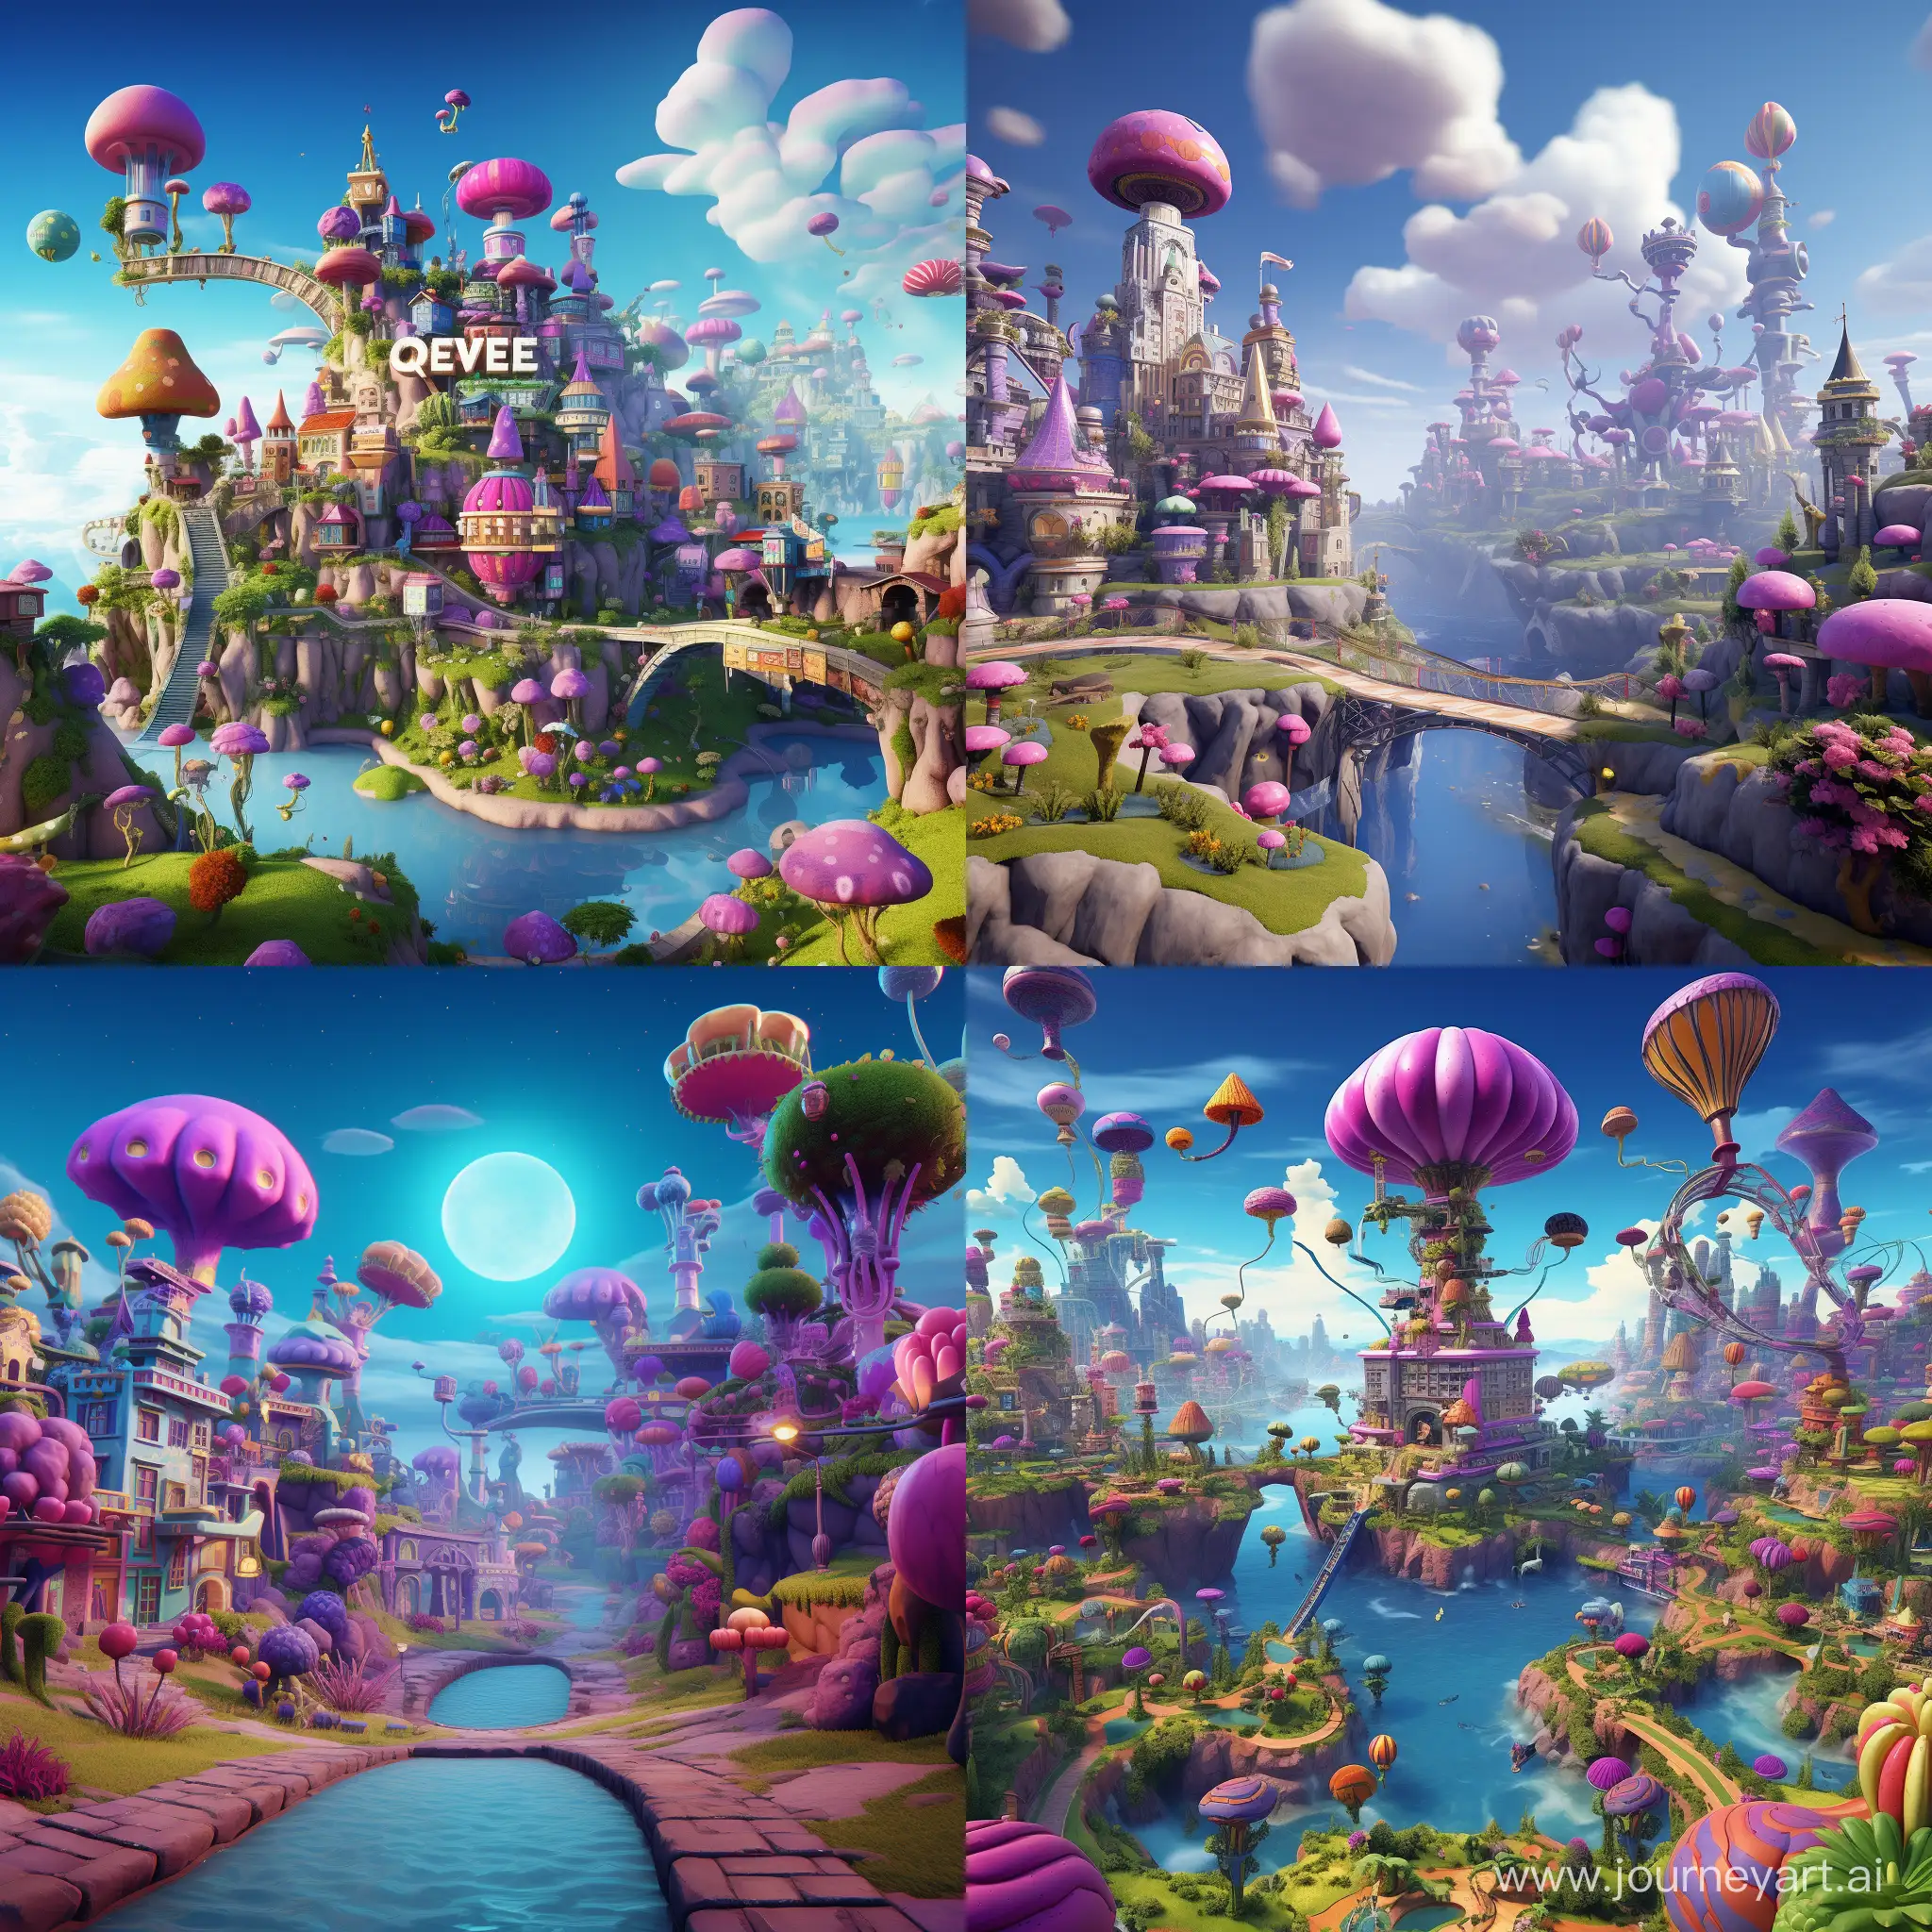 Fortnite-Game-Level-Redesigned-by-Rachel-Maclean-Immersive-11-AR-Experience-with-51253-Elements